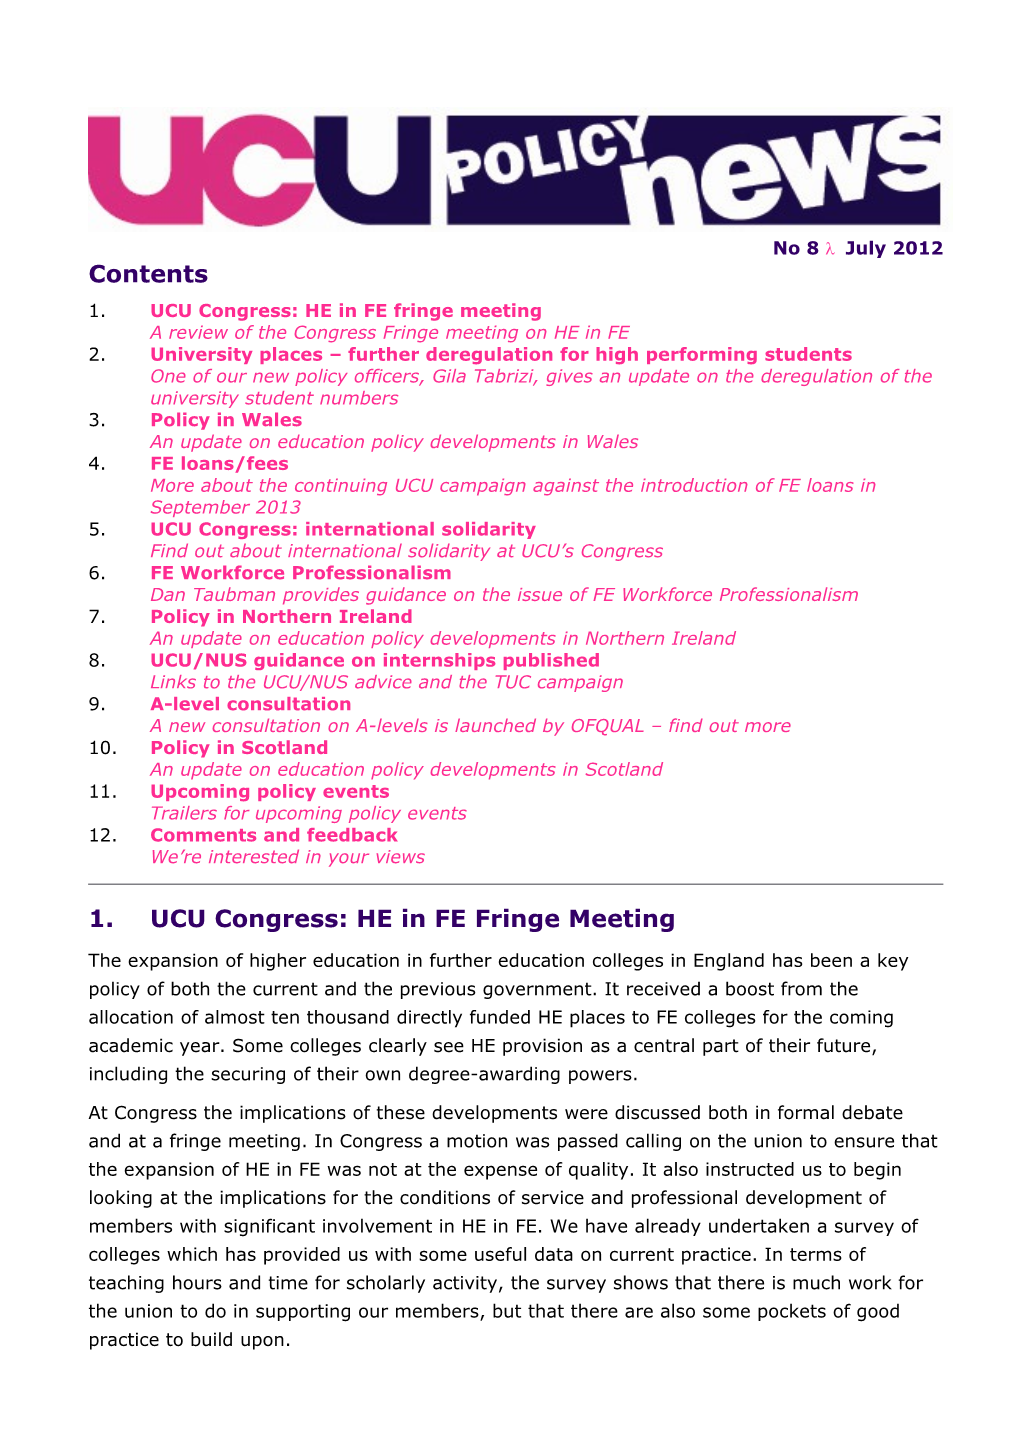 A Review of the Congress Fringe Meeting on HE in FE